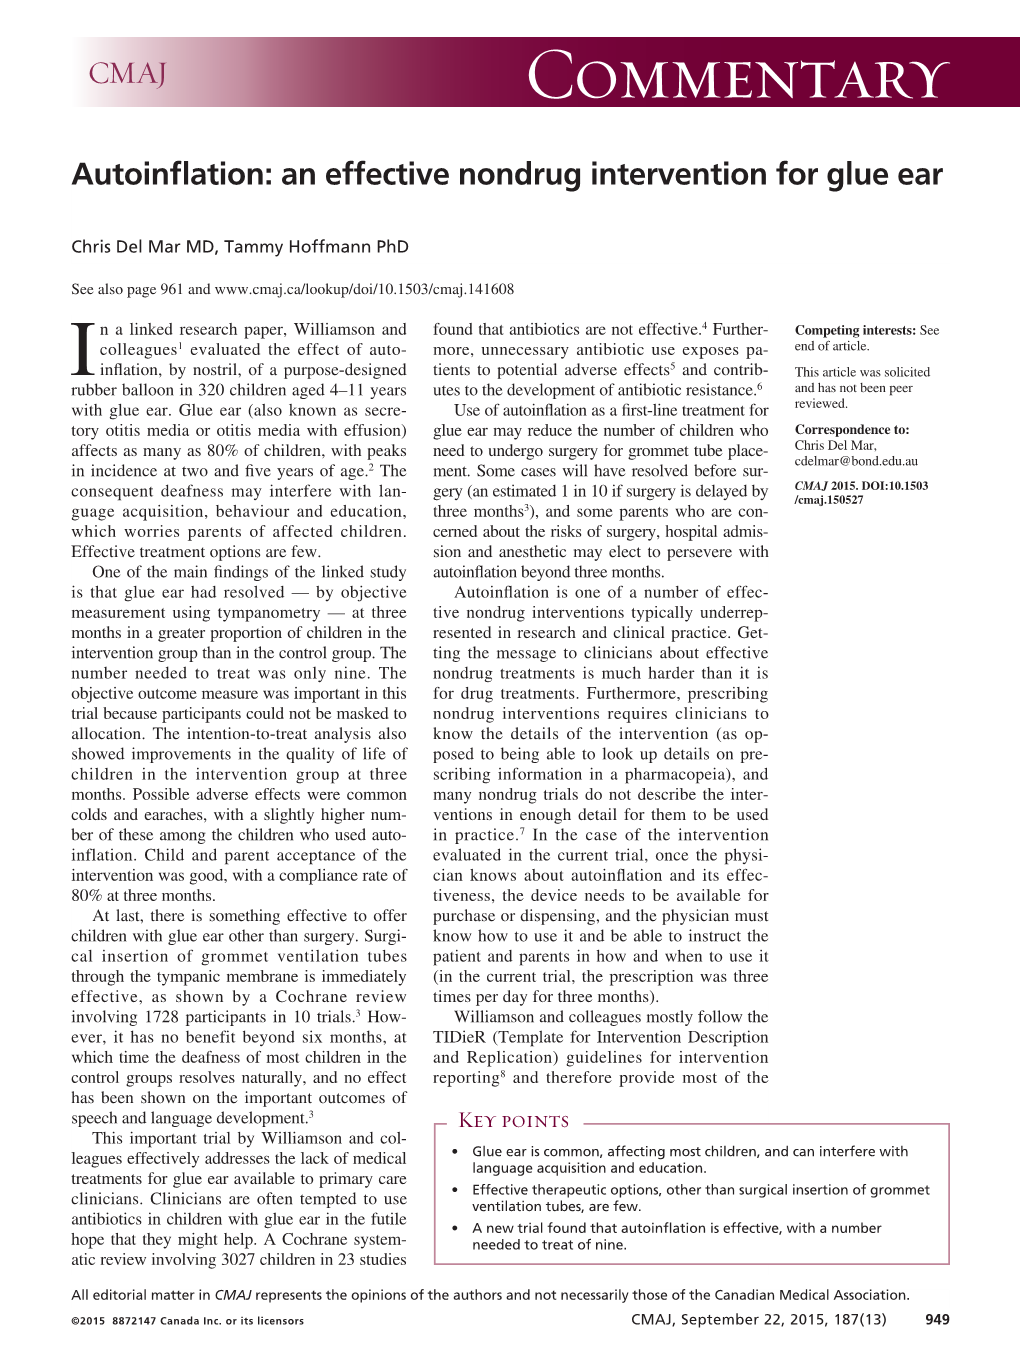 Autoinflation: an Effective Nondrug Intervention for Glue Ear